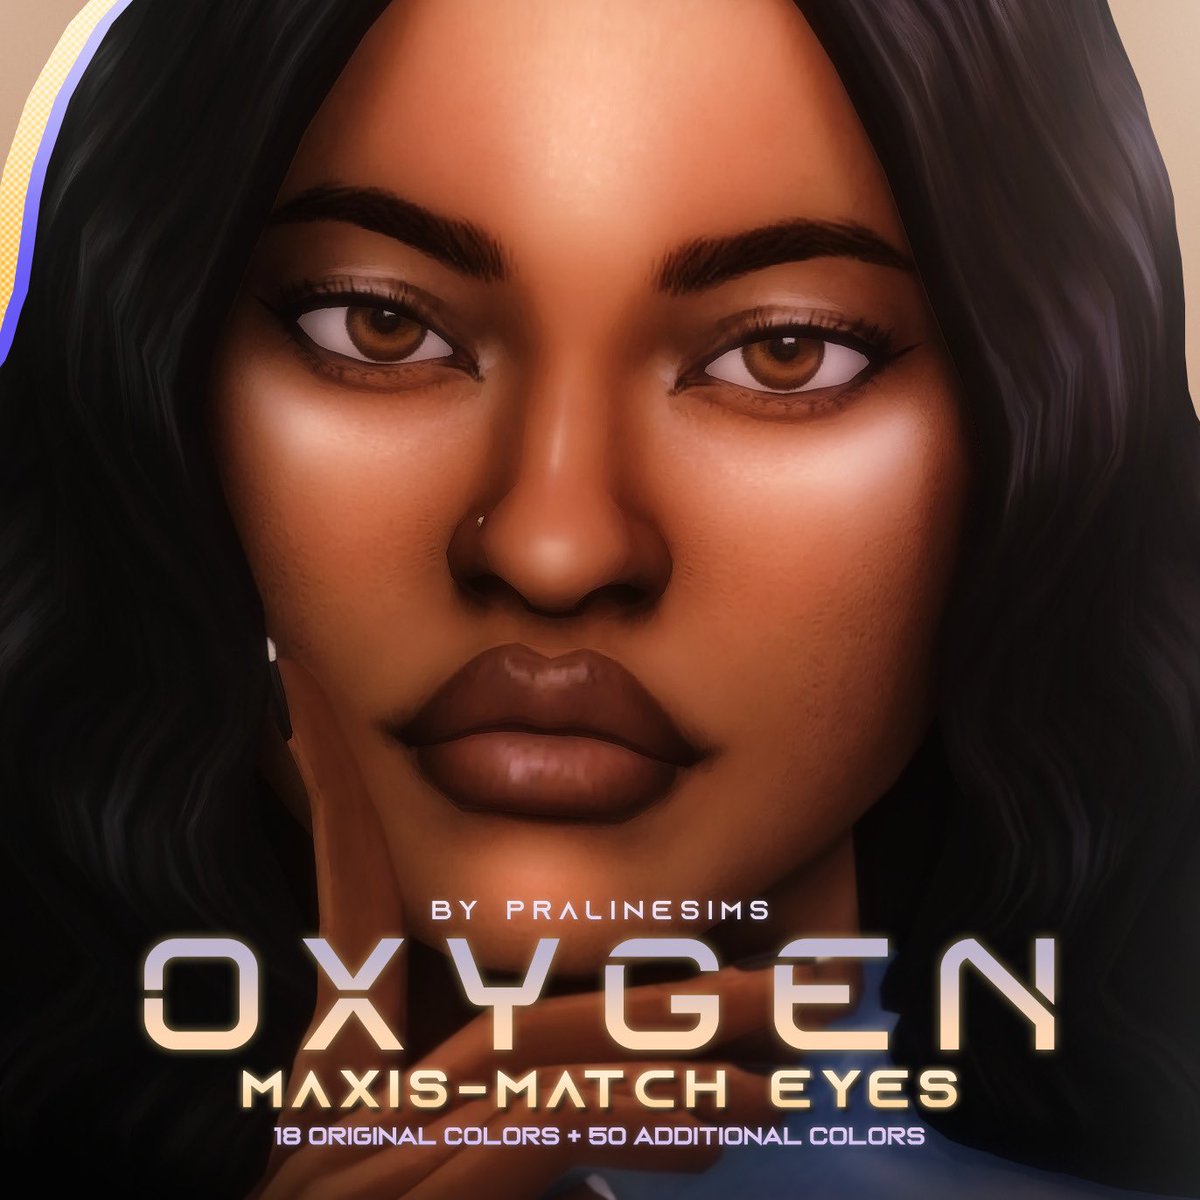 New CC // OXYGEN Maxis-Match Eyes - Some new, clean looking eyes by me, they come in a huge bunch of variations!

🖤 Download here for FREE:
tumblr.com/pralinesims/74…

If you like, please consider to support my work, it would mean so much to me! 🫶🏻

#ts4cc #s4cc #ts4 #TheSims4